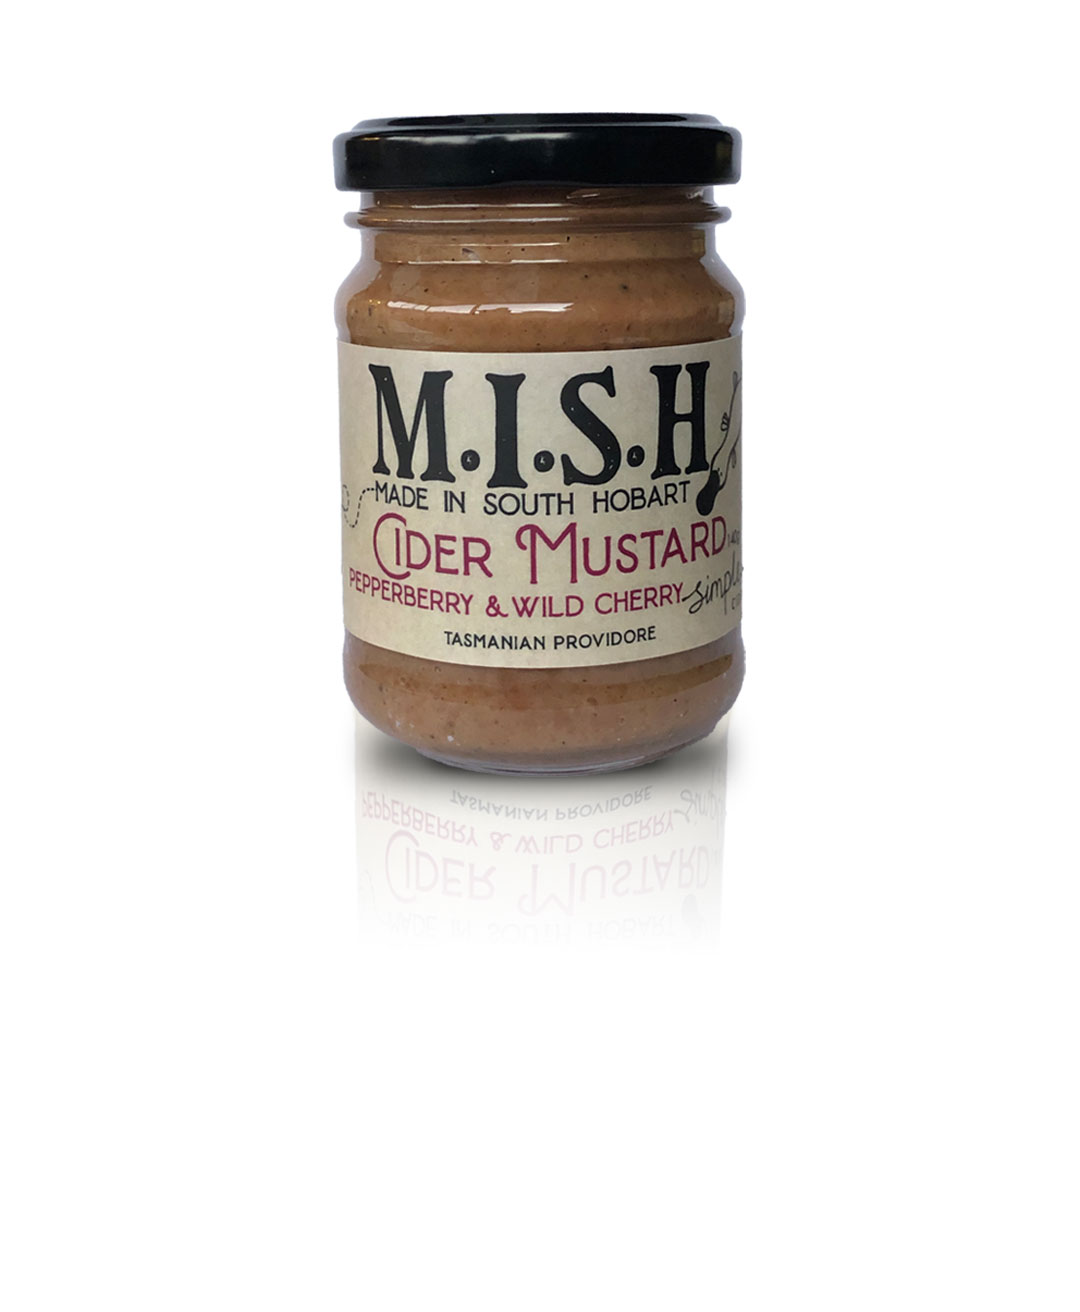 MISH Made in South Hobart Cider Mustard